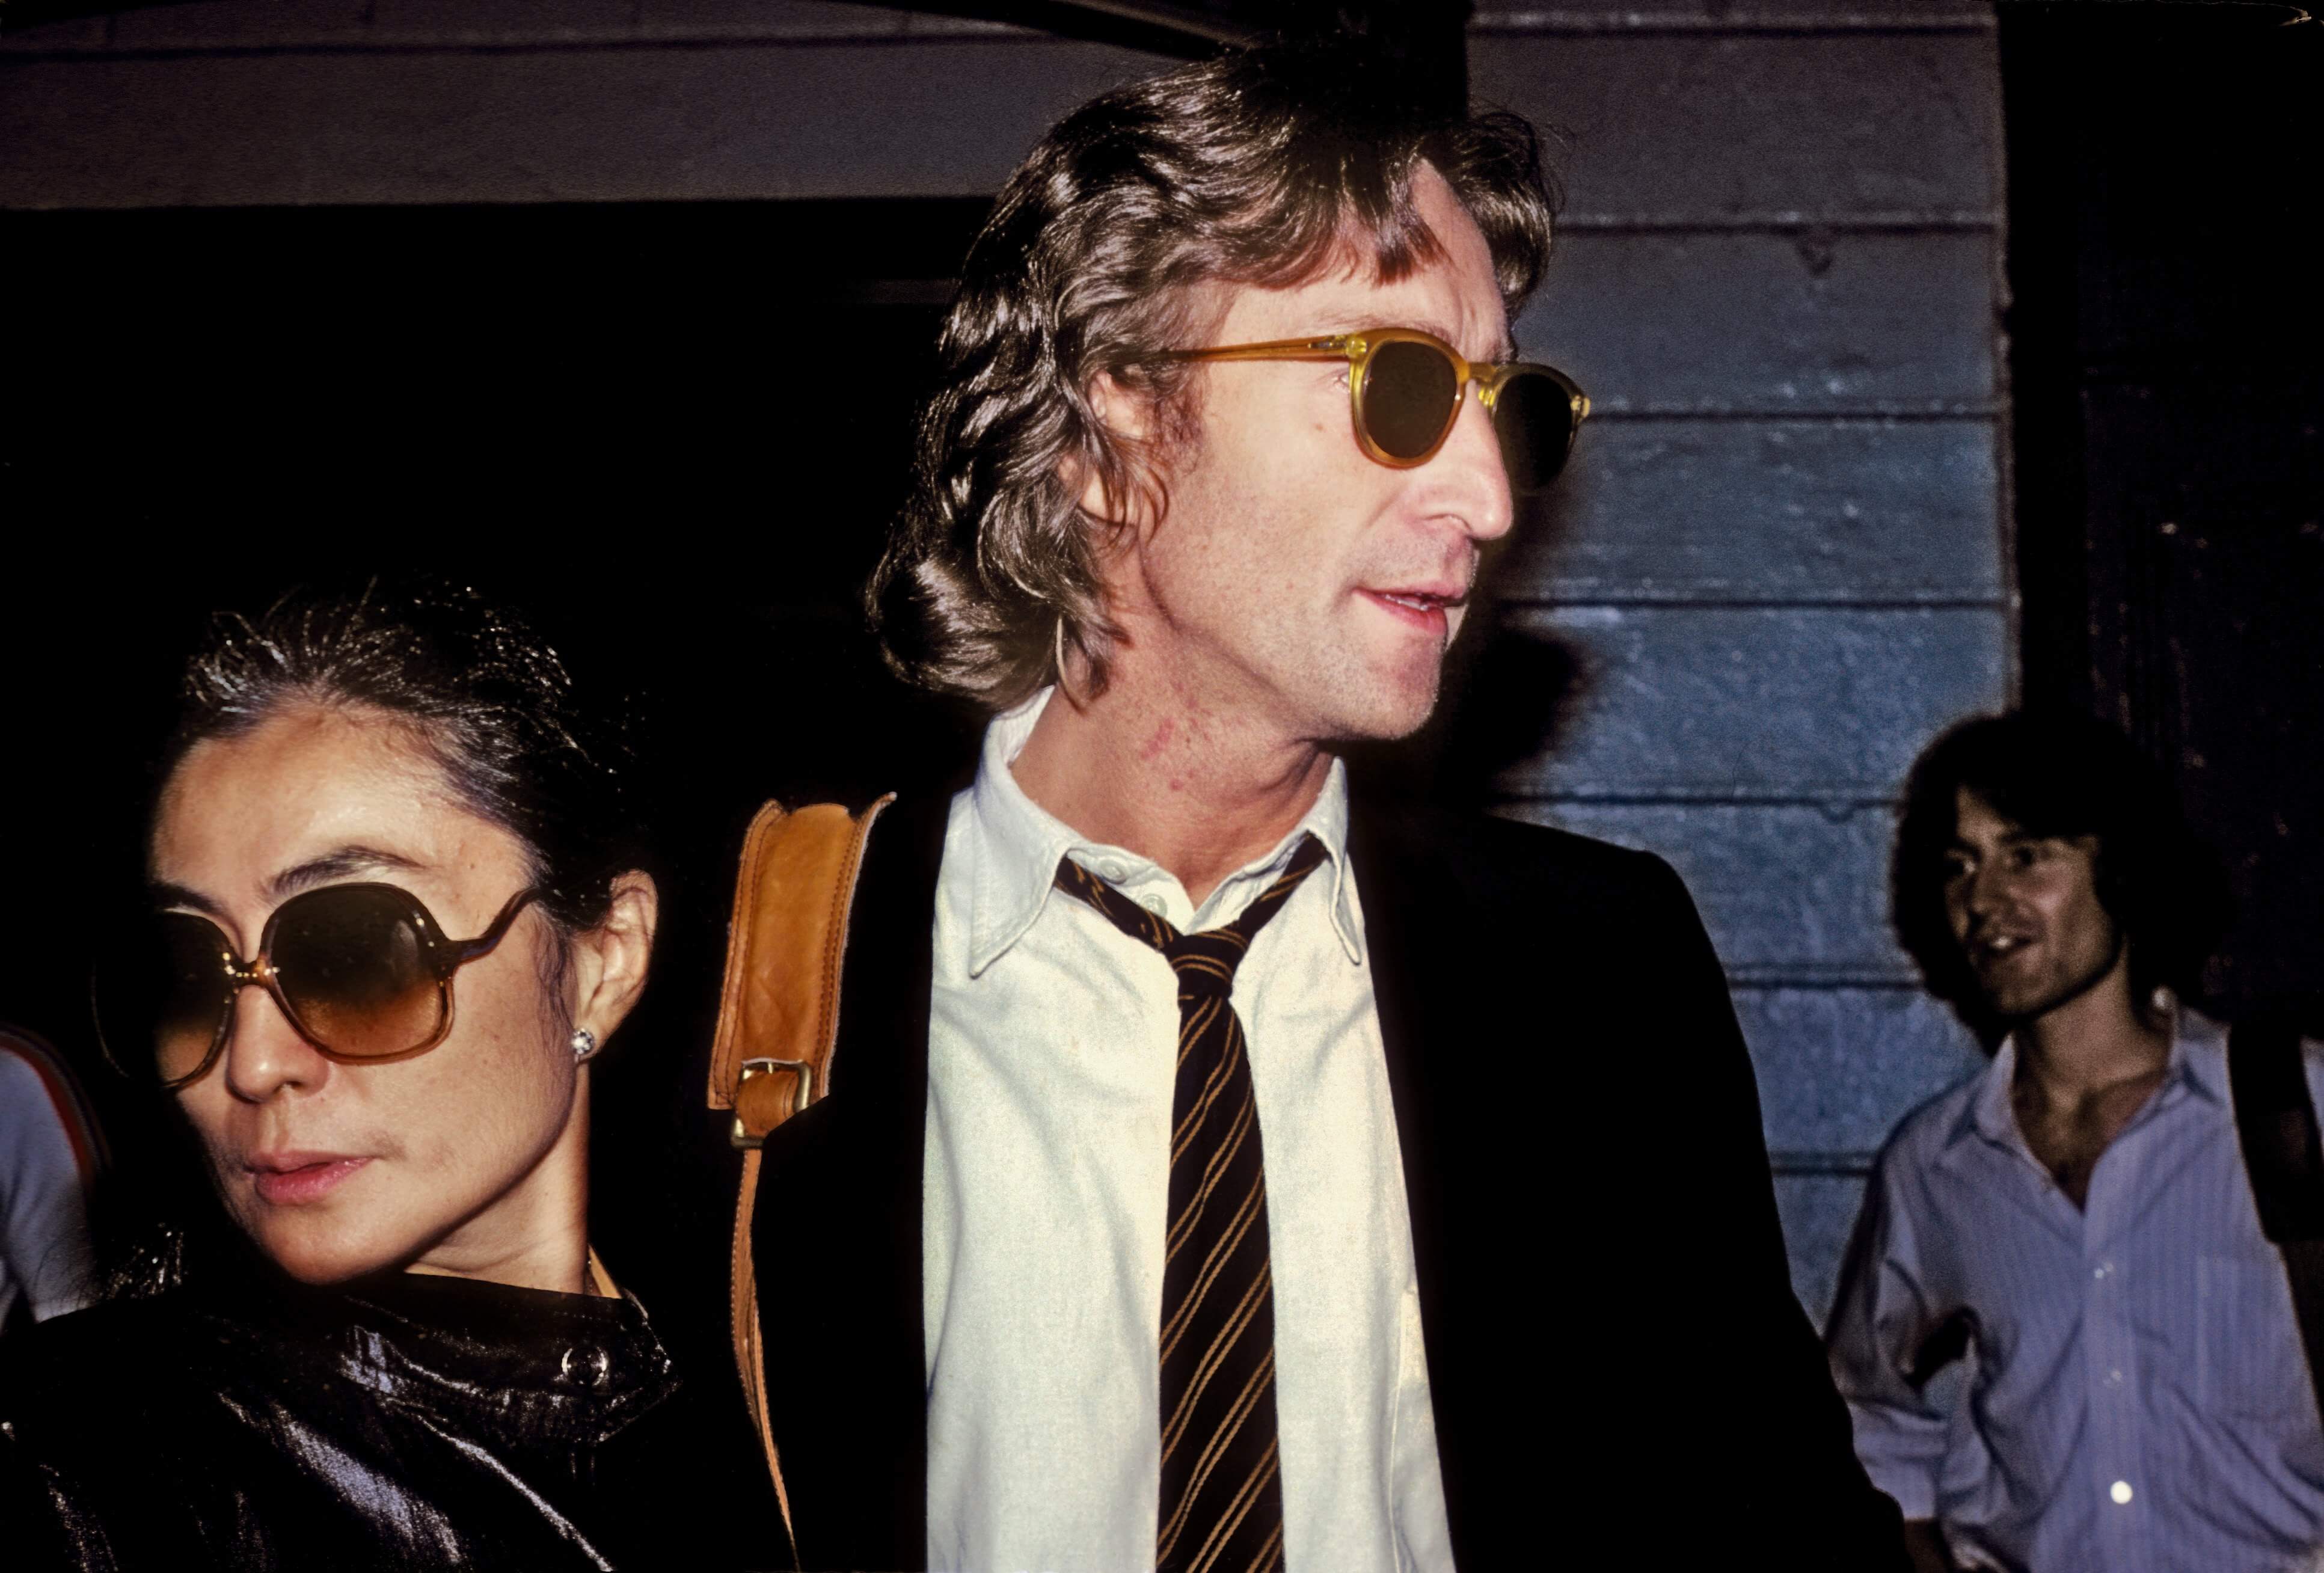 Former Beatle John Lennon and his wife Yoko Ono outside of the Times Square recording studio 'The Hit Factory' before a recording session of his final album 'Double Fanasy'